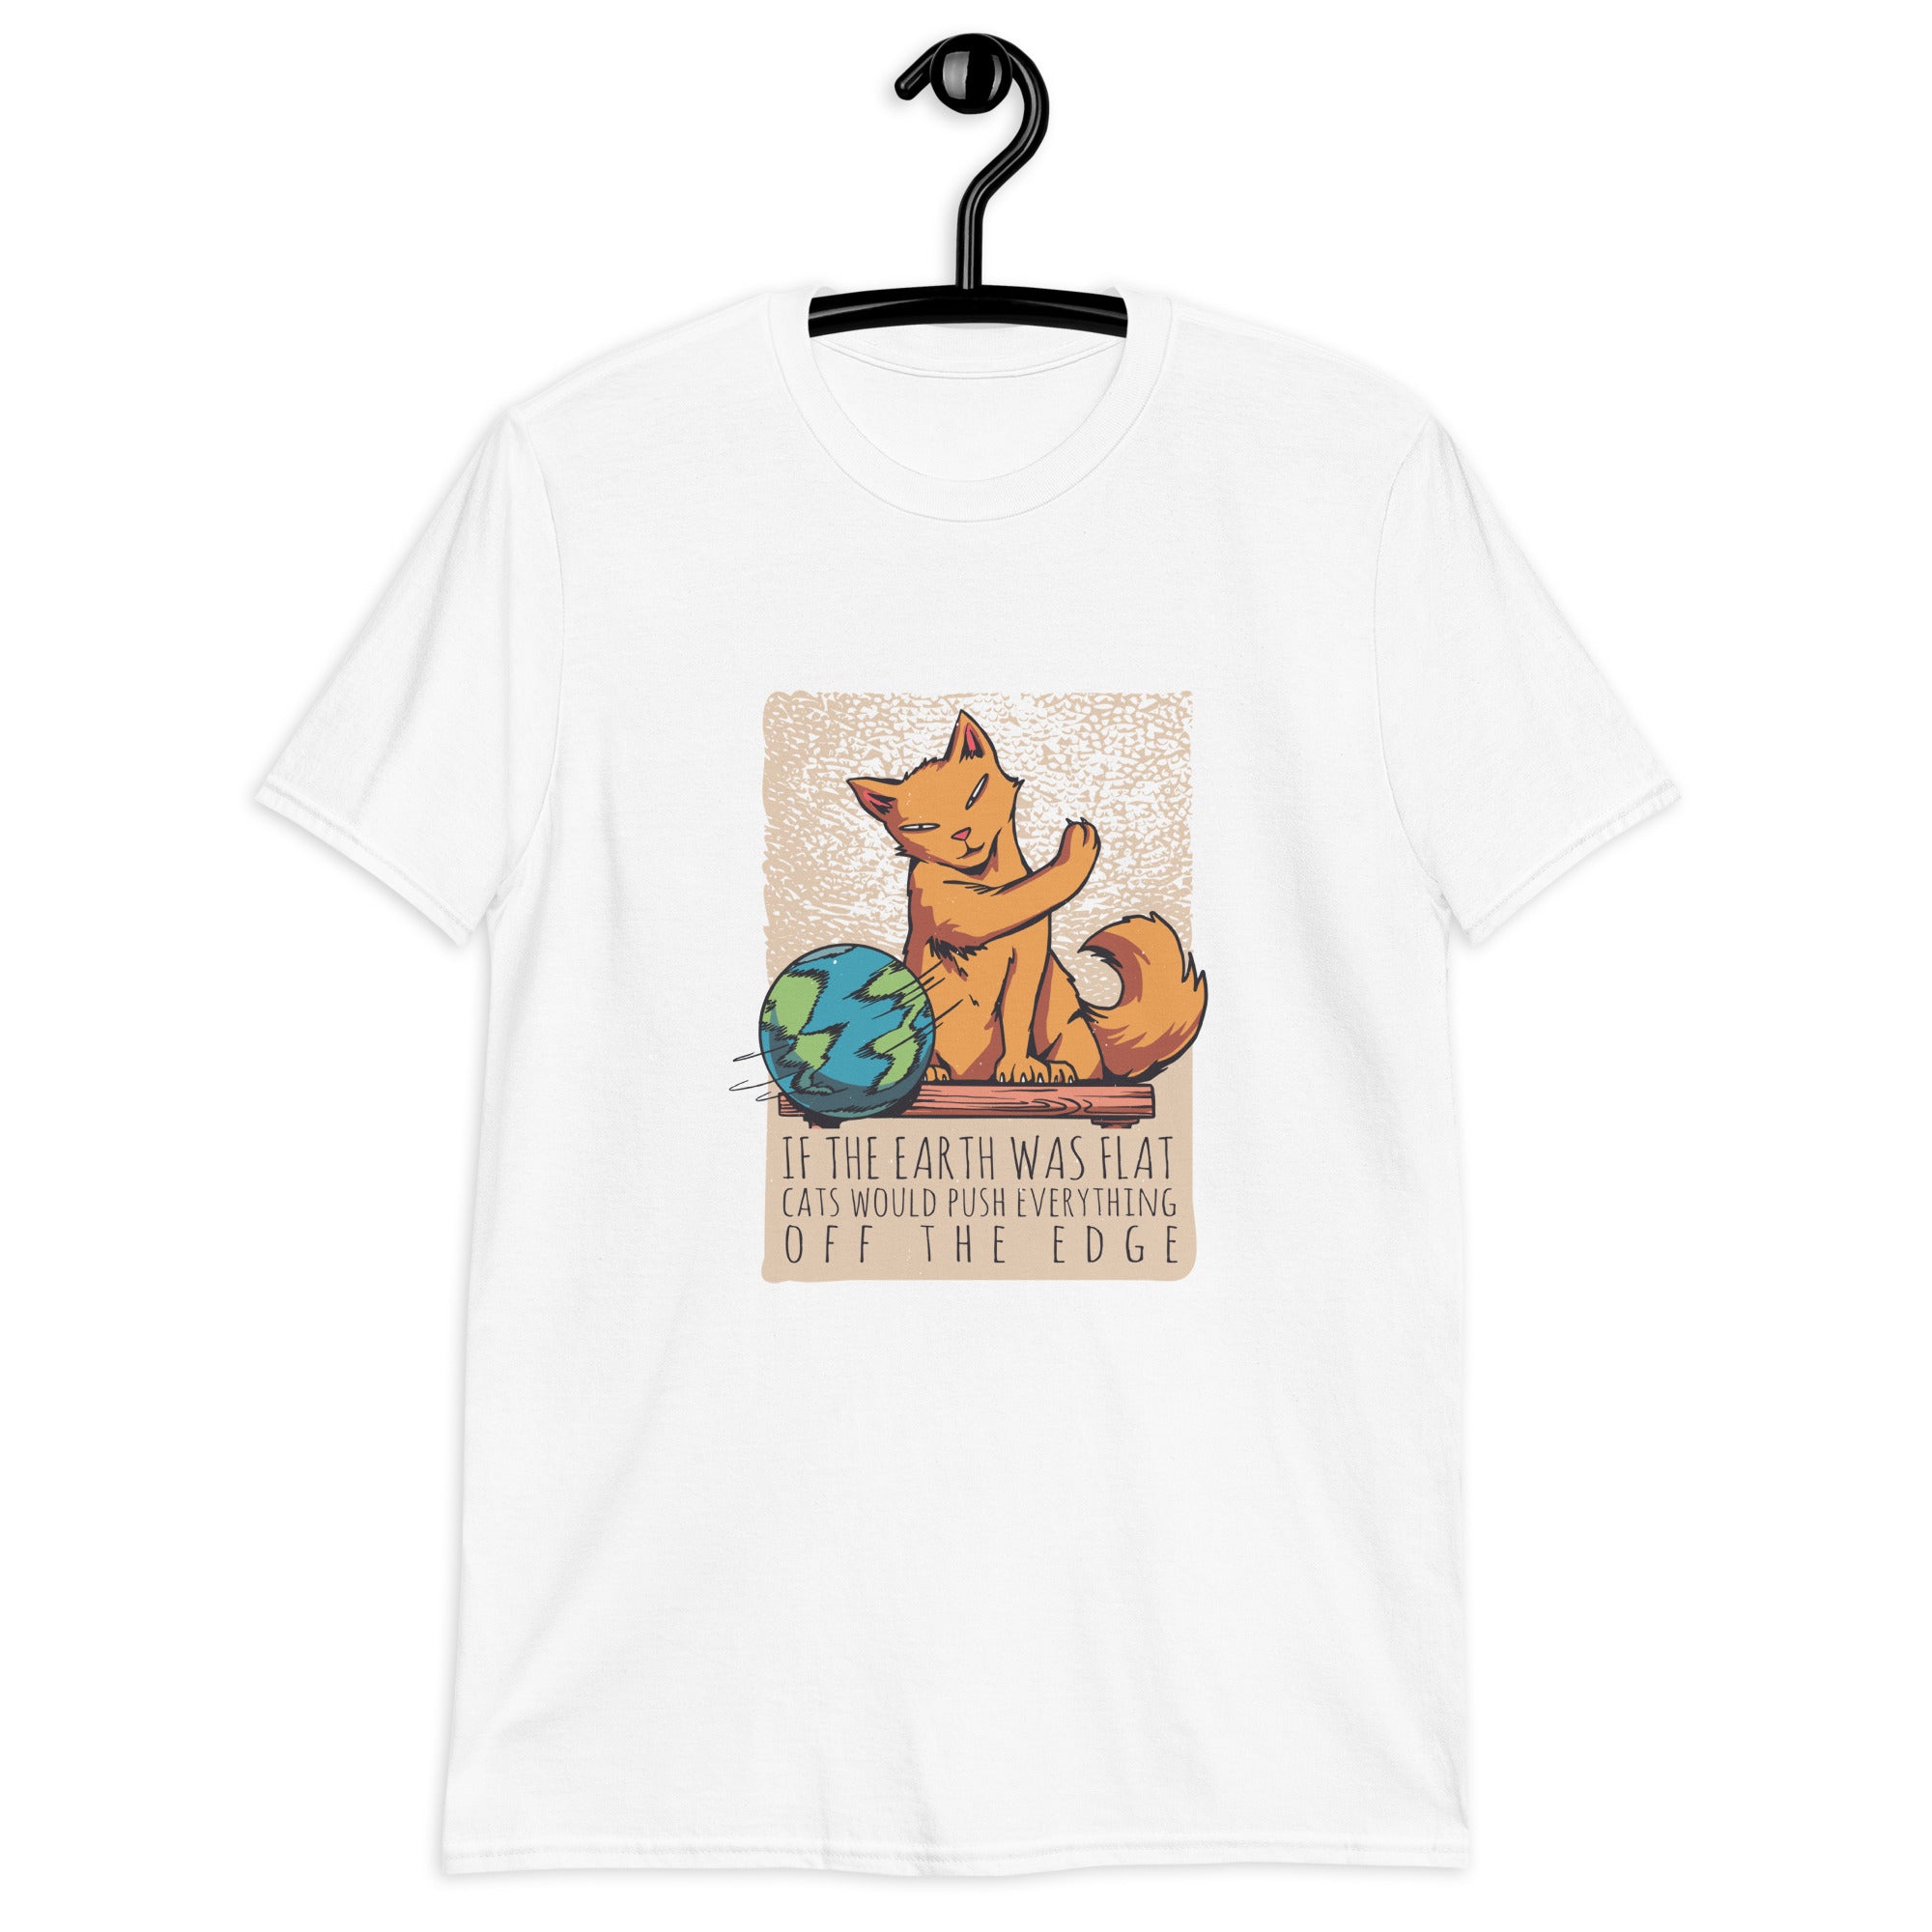 Short-Sleeve Unisex T-Shirt | If the earth was flat, cats would push everything off the edge